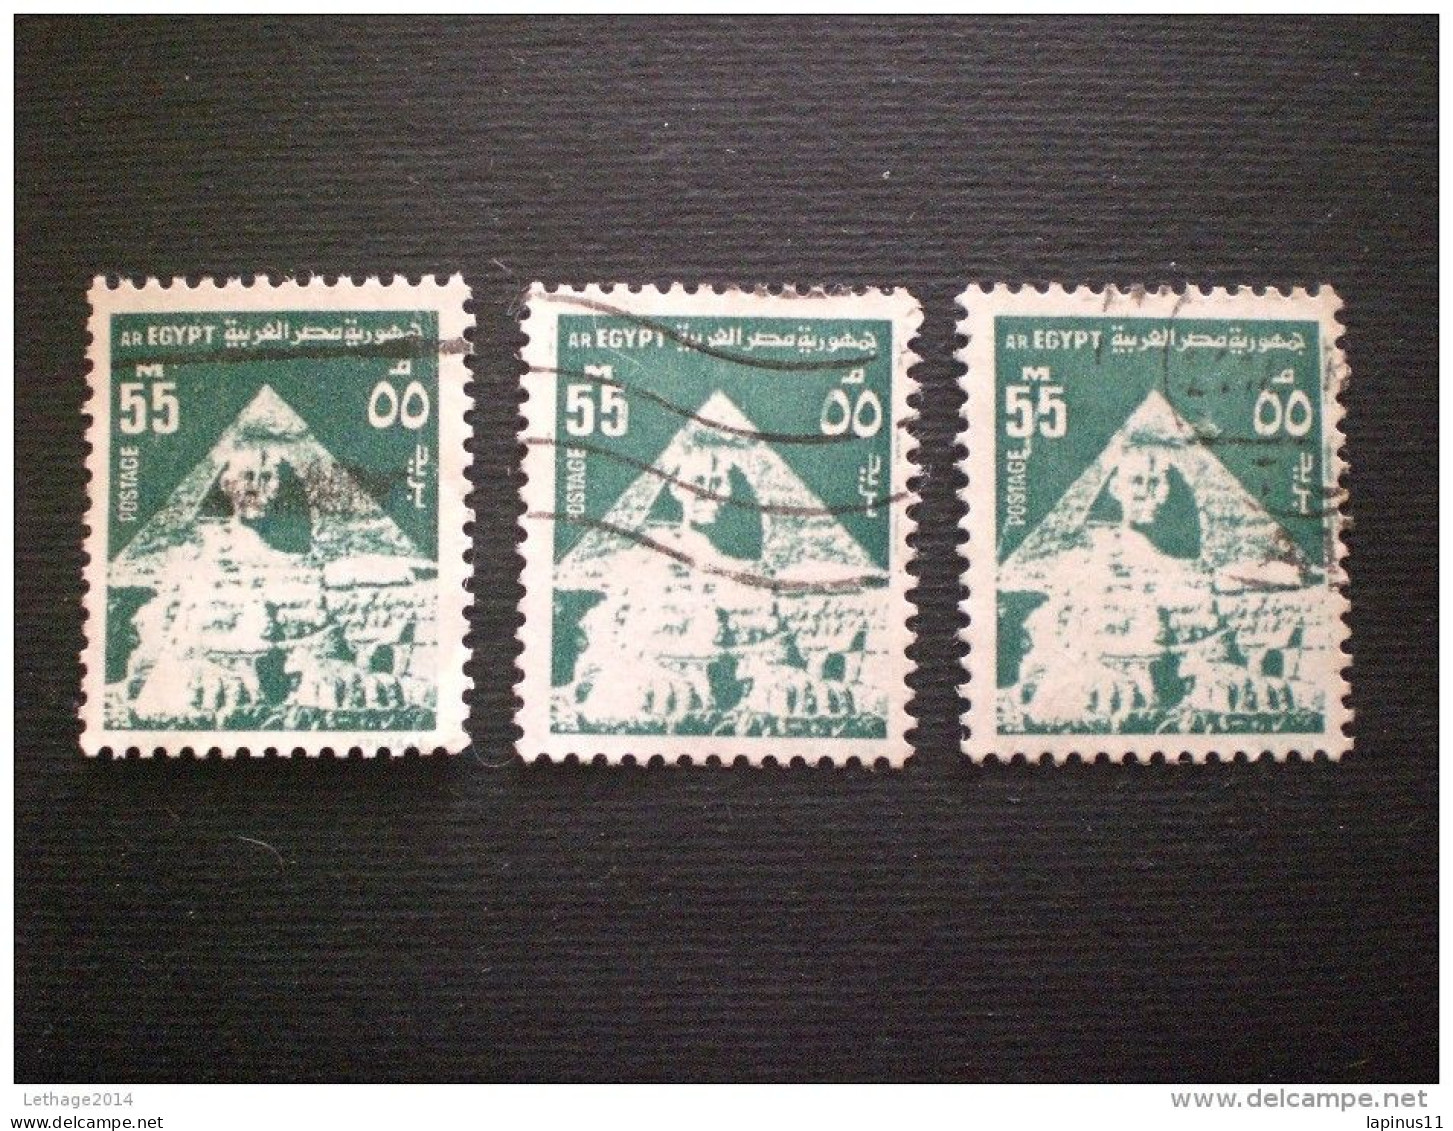 STAMPS EGITTO 1974 Definitive Issue STAMPS RARE !!! - Used Stamps